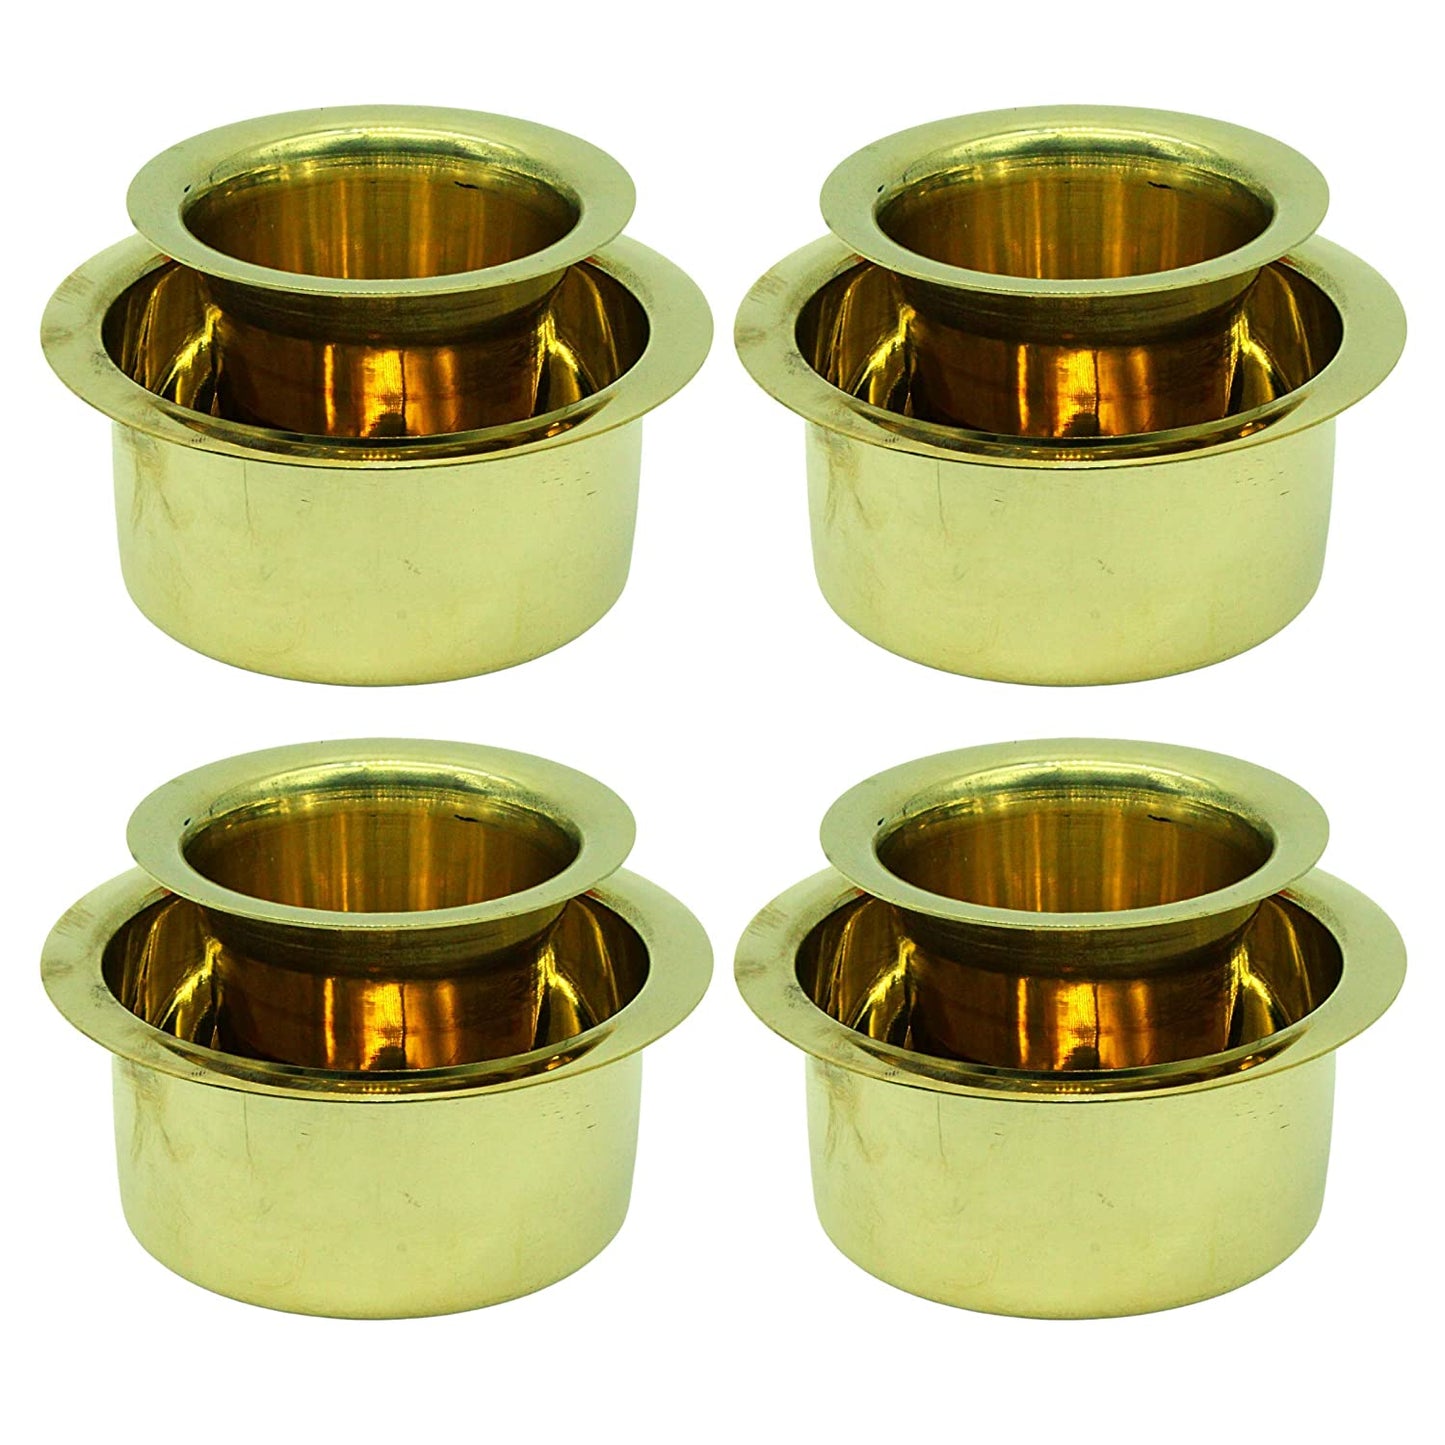 Brass Traditional Coffee Dabara Set for Tasting Excellent South Indian Filter Coffee | Brass Tumbler | Coffee Cup